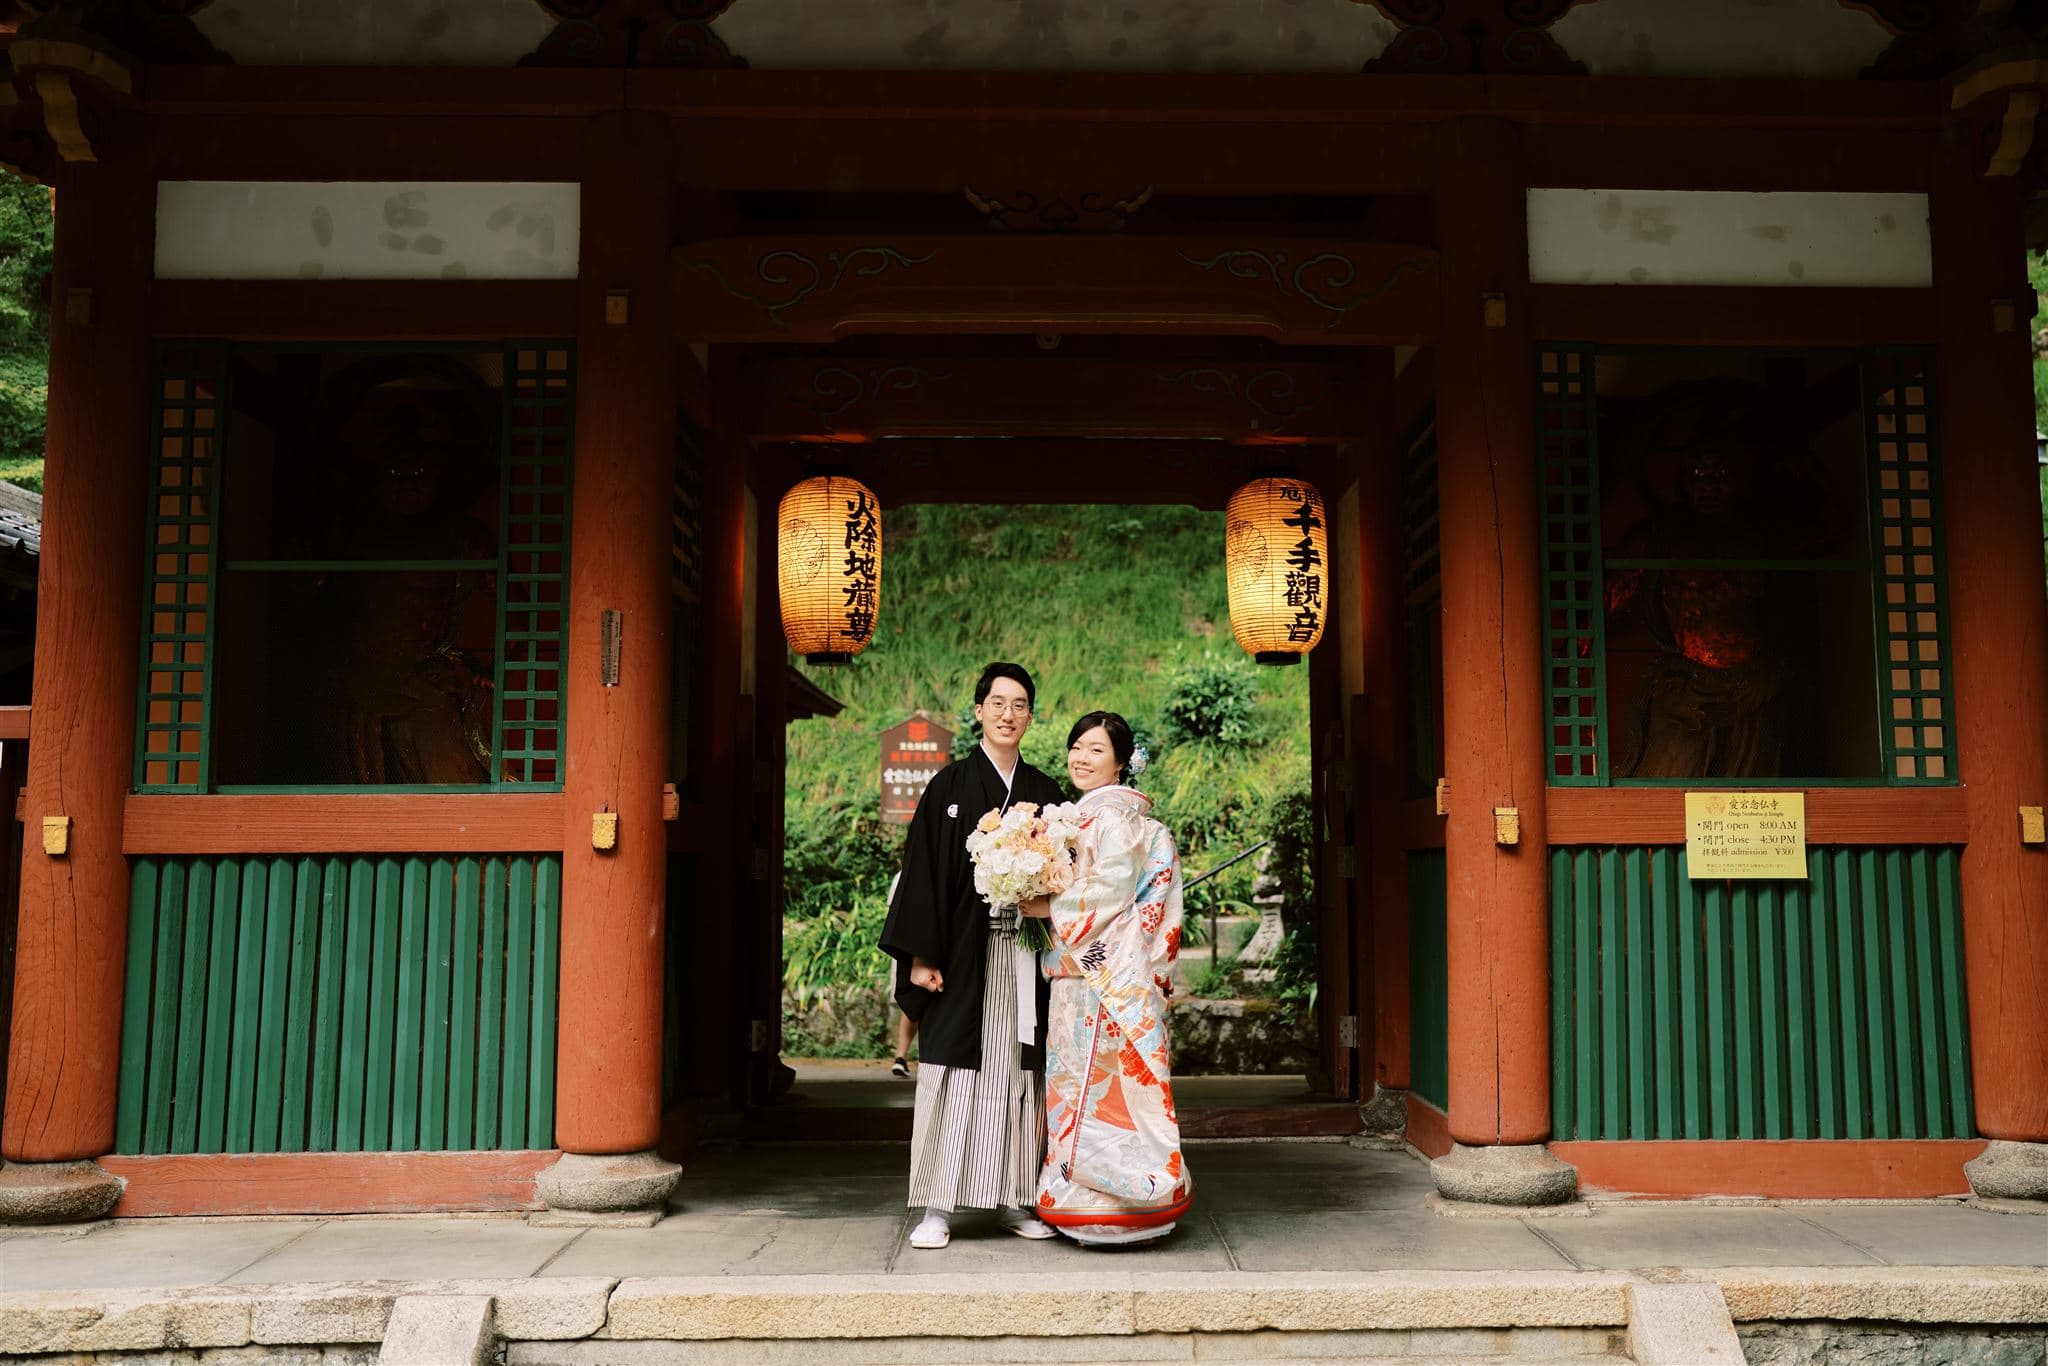 Japan Elopement Wedding Photographer, Planner & Videographer | A couple in kimono standing in front of a shrine, planning their elopement wedding in Japan.